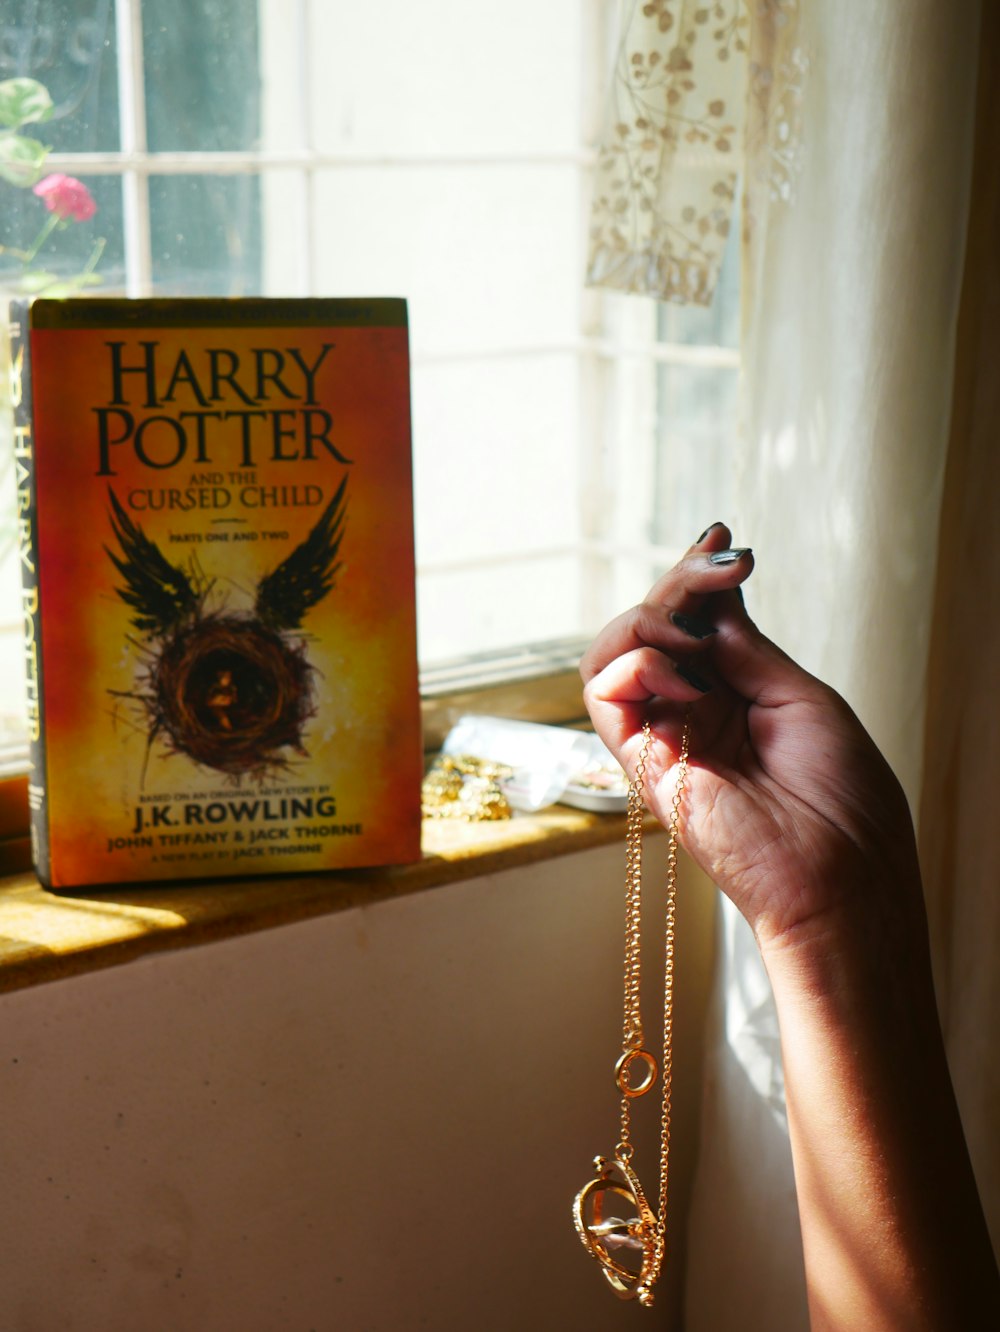 Harry Potter and the Cursed Child by J.K. Rowling book